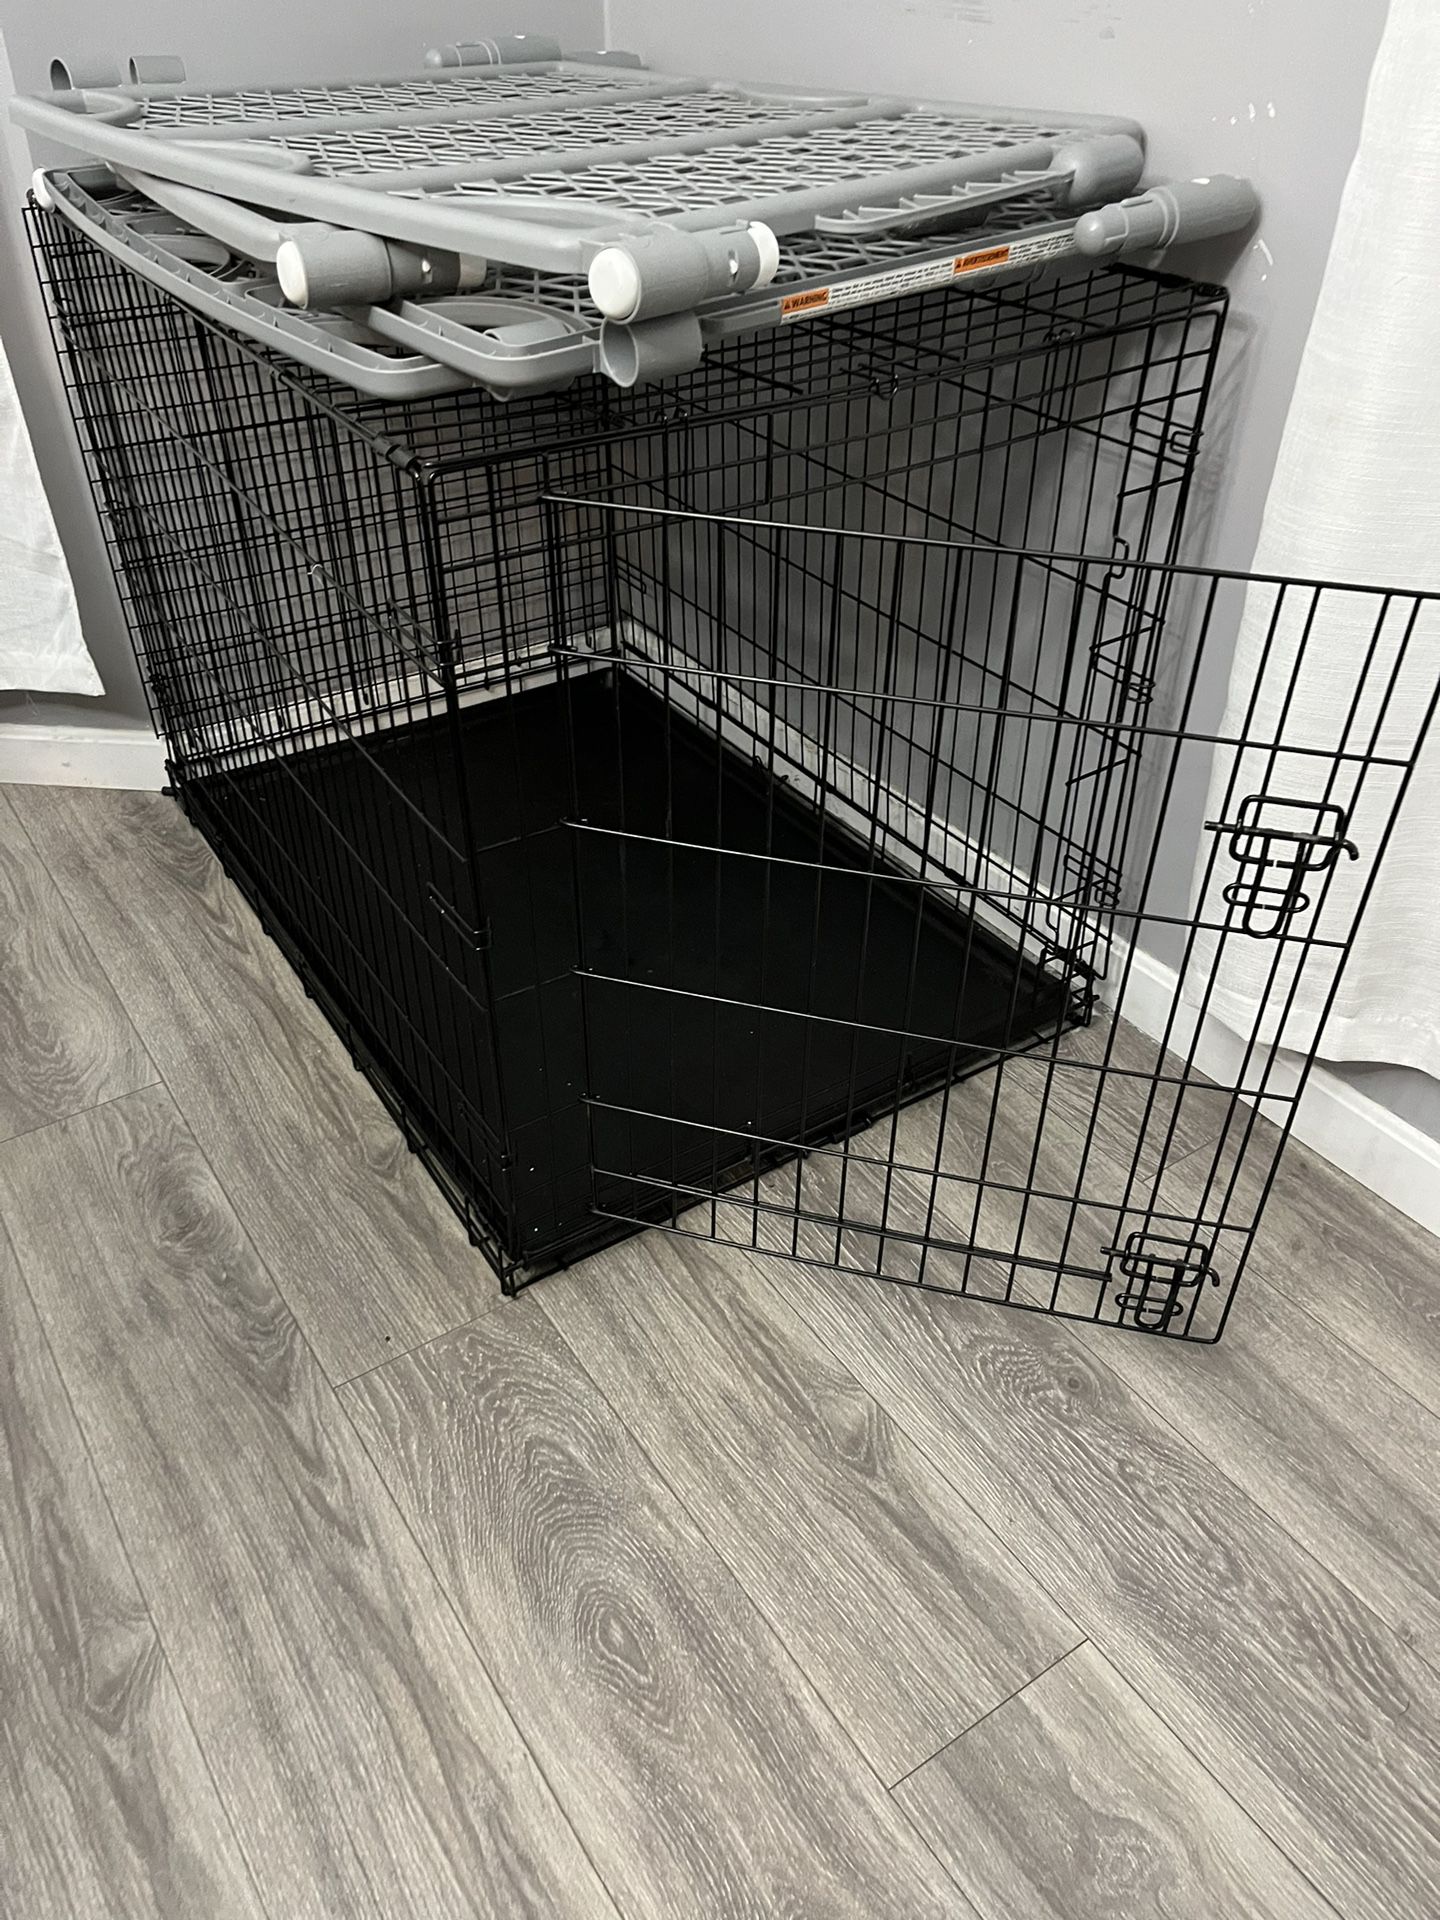 Dog Crate - XL Best Offer Is Accepted